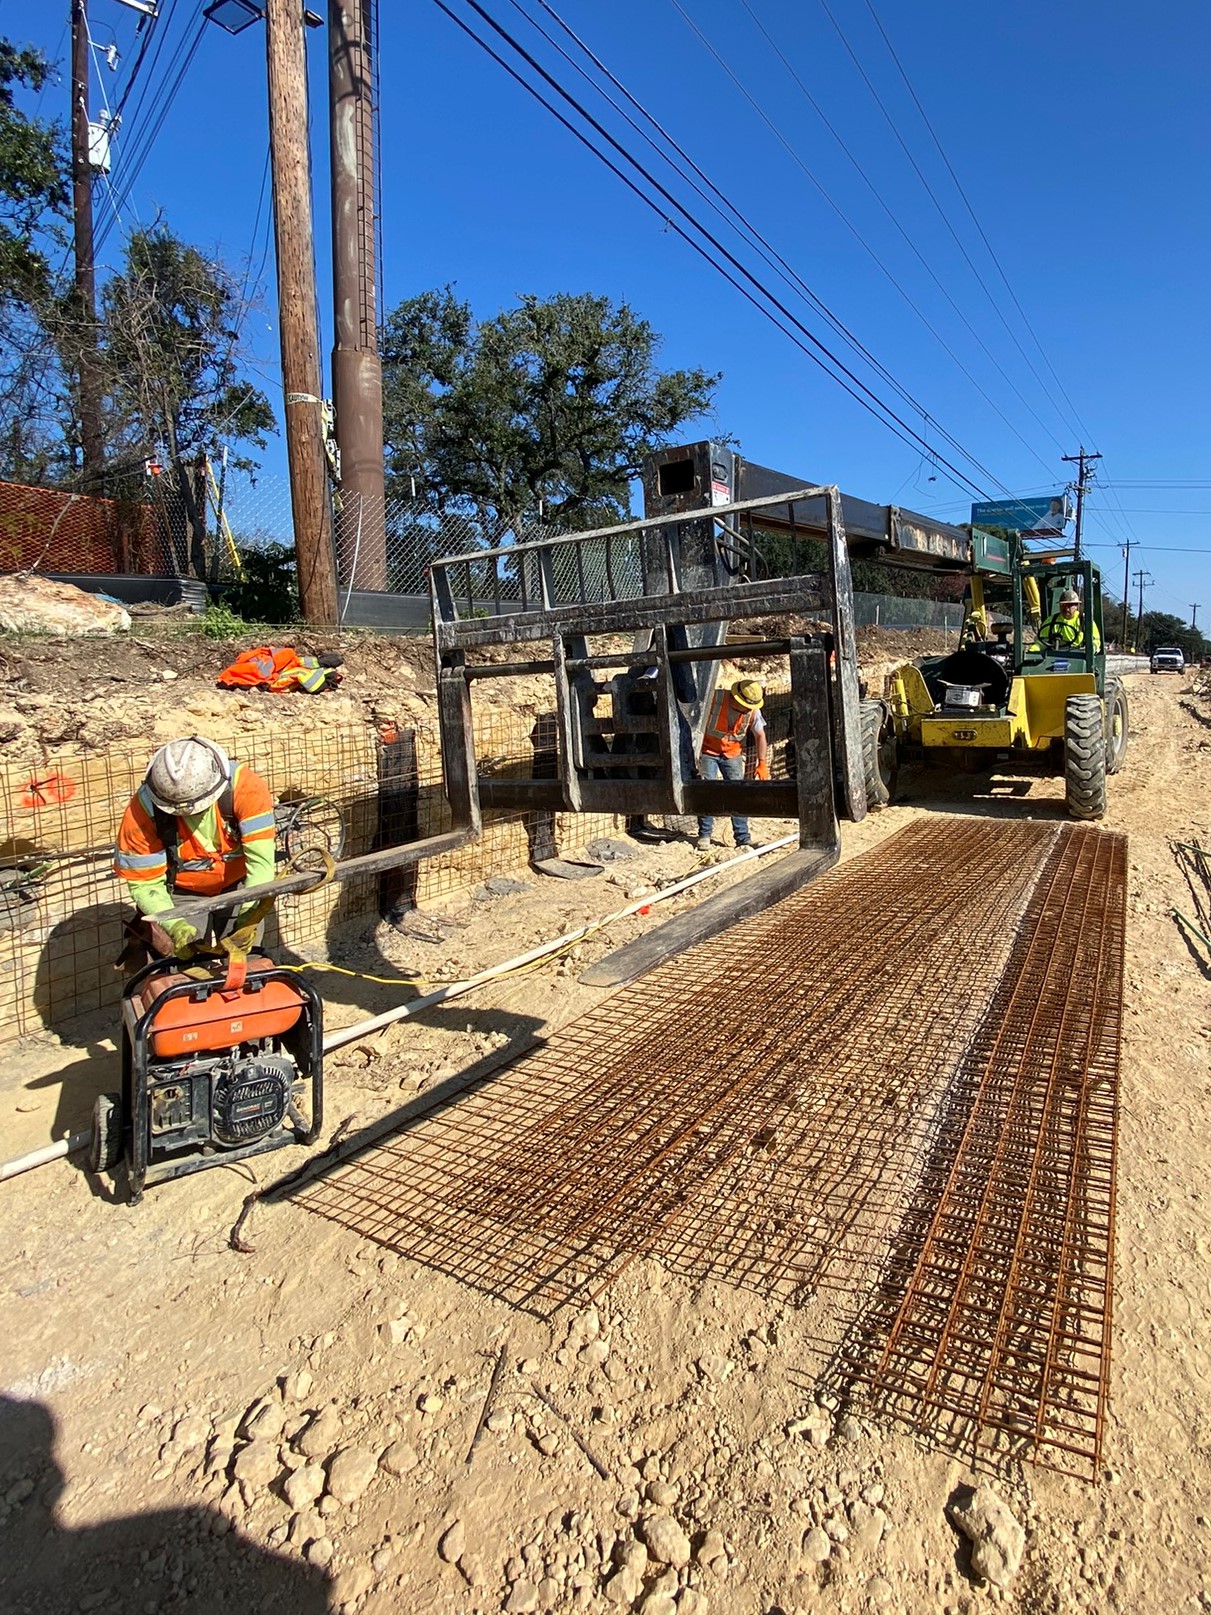 The team prepares to cut and place wire mesh to reinforce a retaining wall being built near US 290 and Circle Drive. December 2021